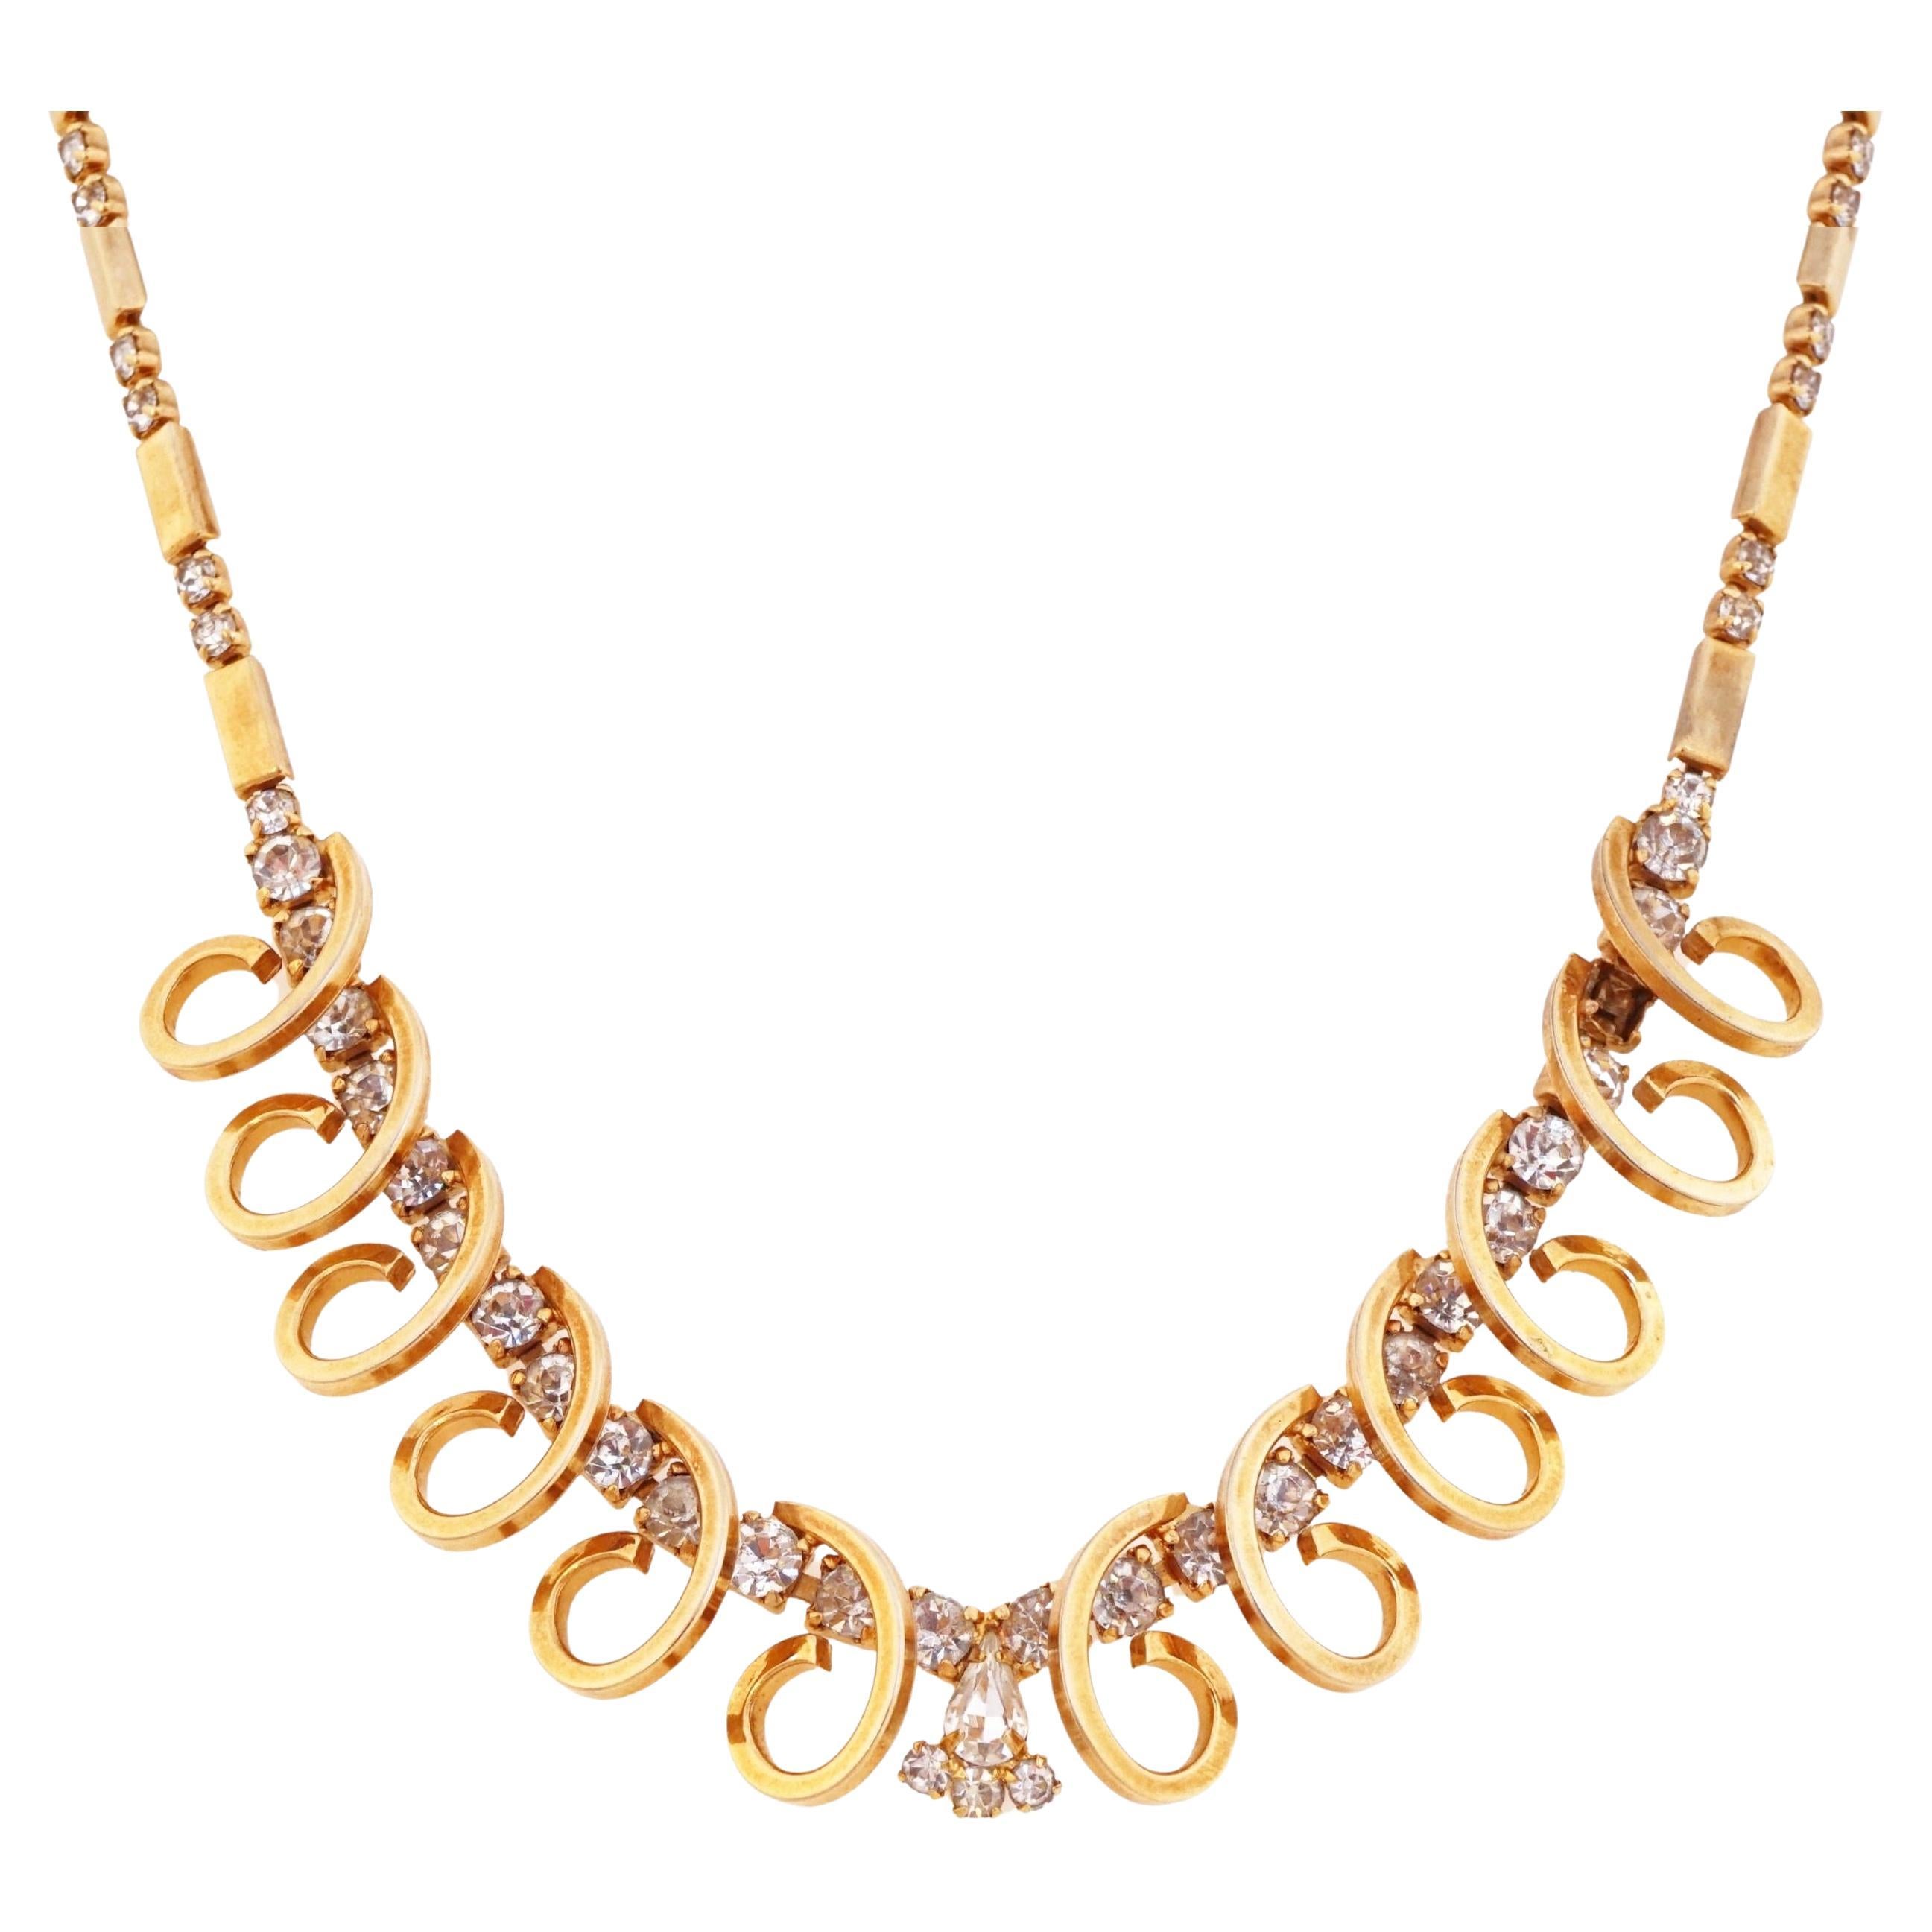 Gilded Swirl "Celestial Fire" Choker Necklace By Sarah Coventry, 1950s For Sale